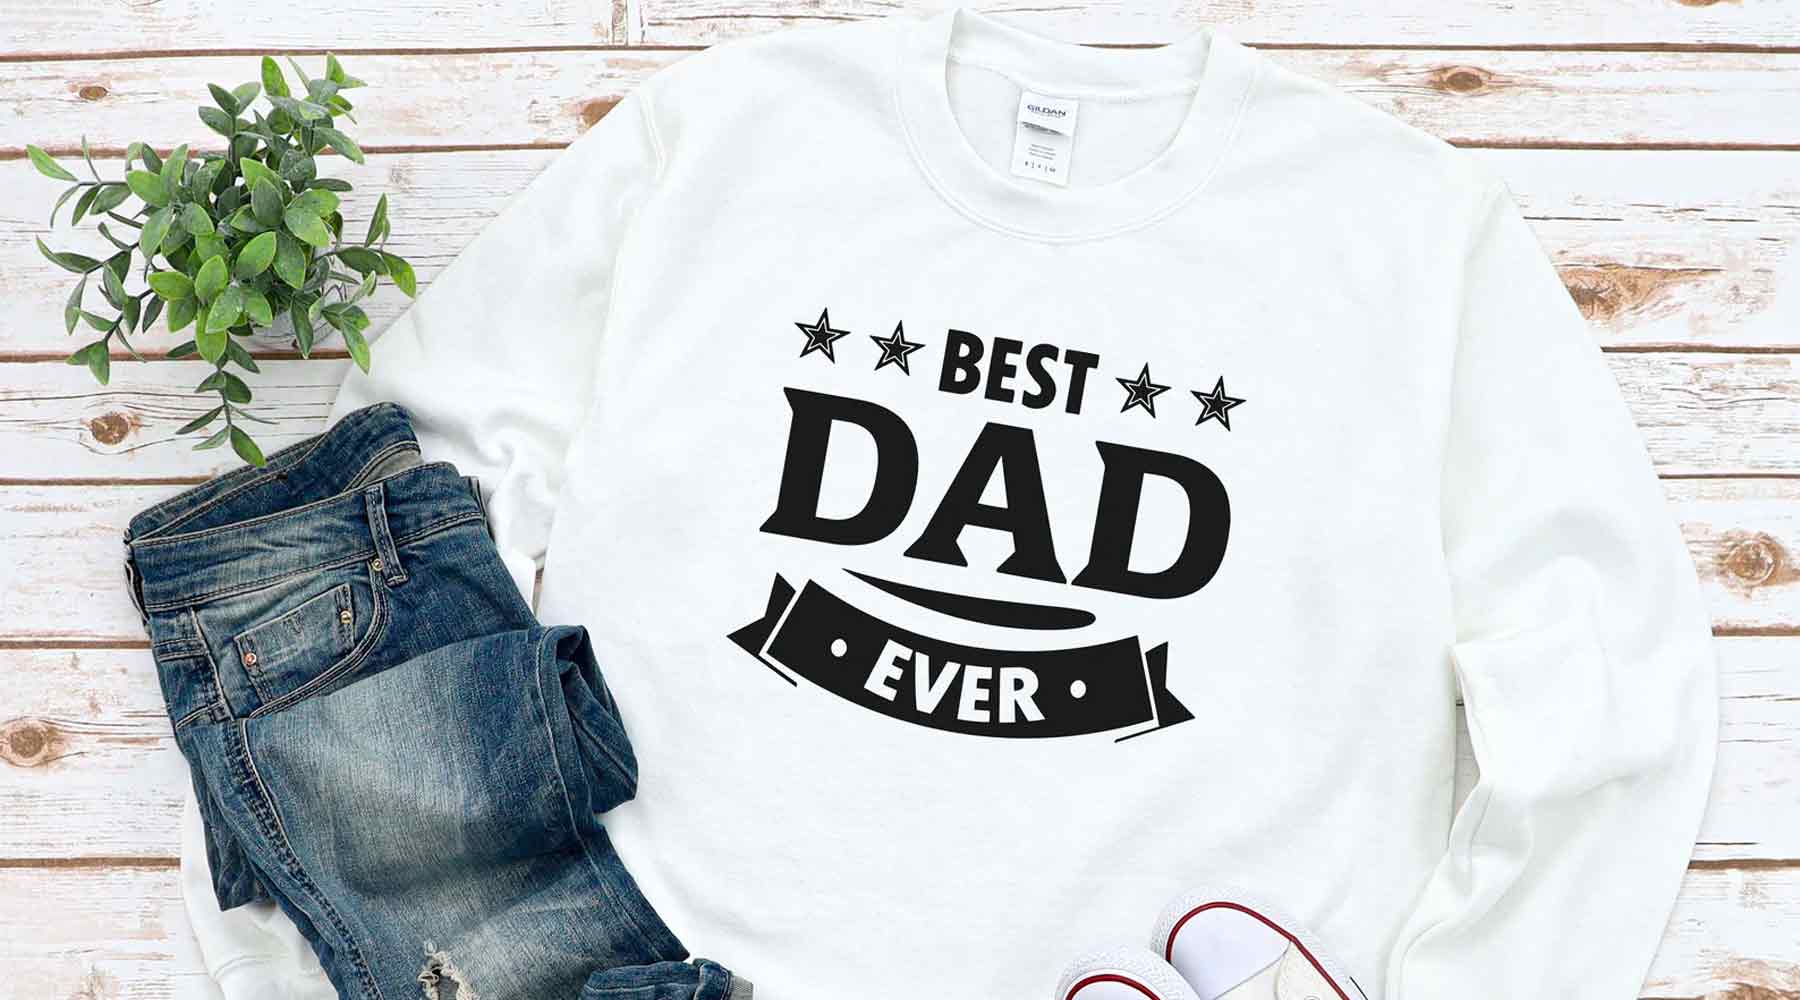 The procrastinator's guide to last-minute Father's Day gifts